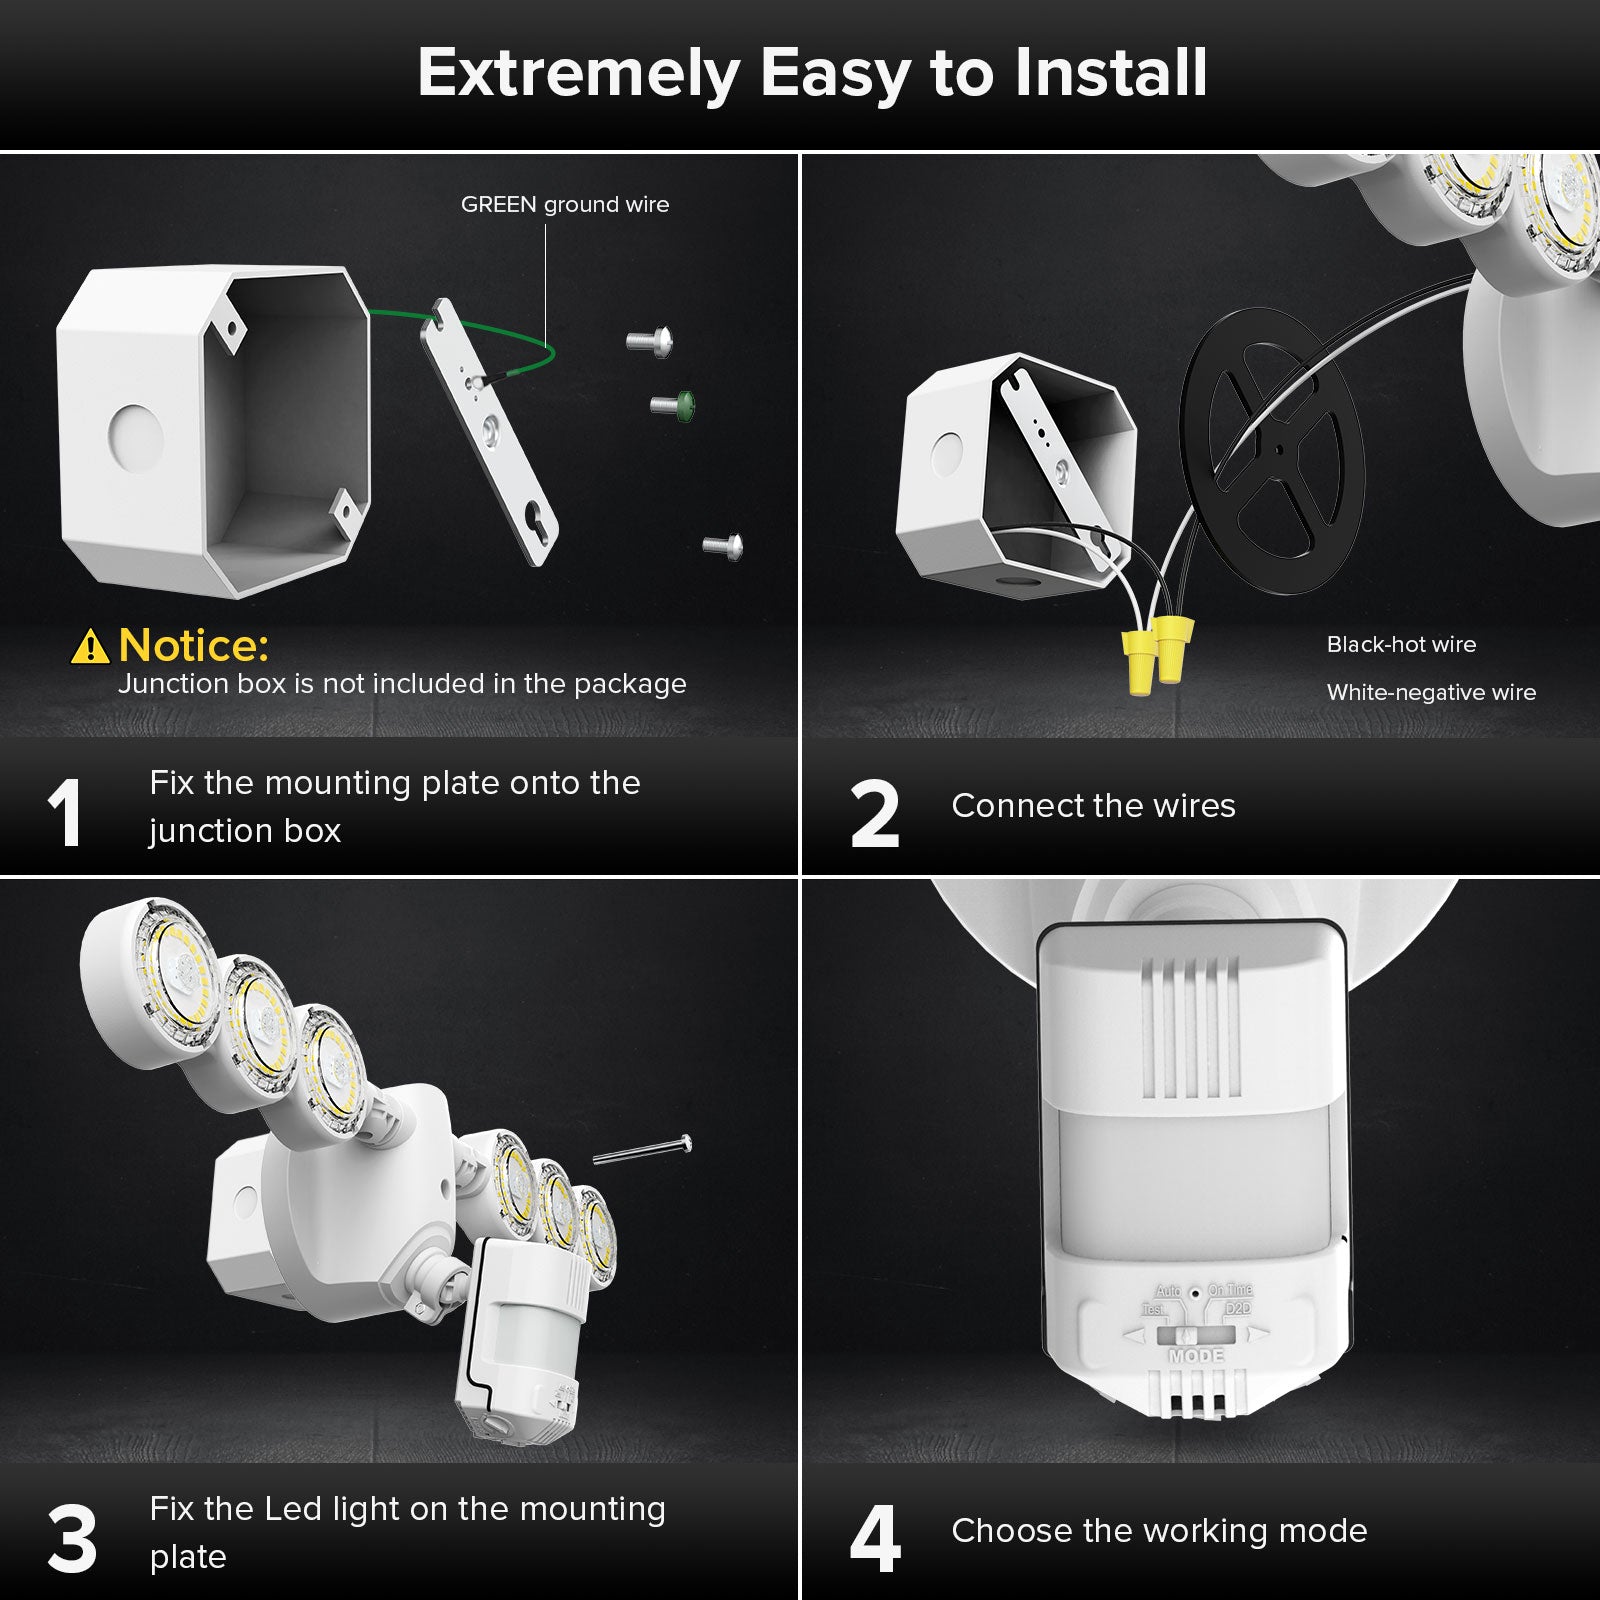 45W LED Security Light (Dusk to Dawn & Motion Sensor) is extremely easy to install